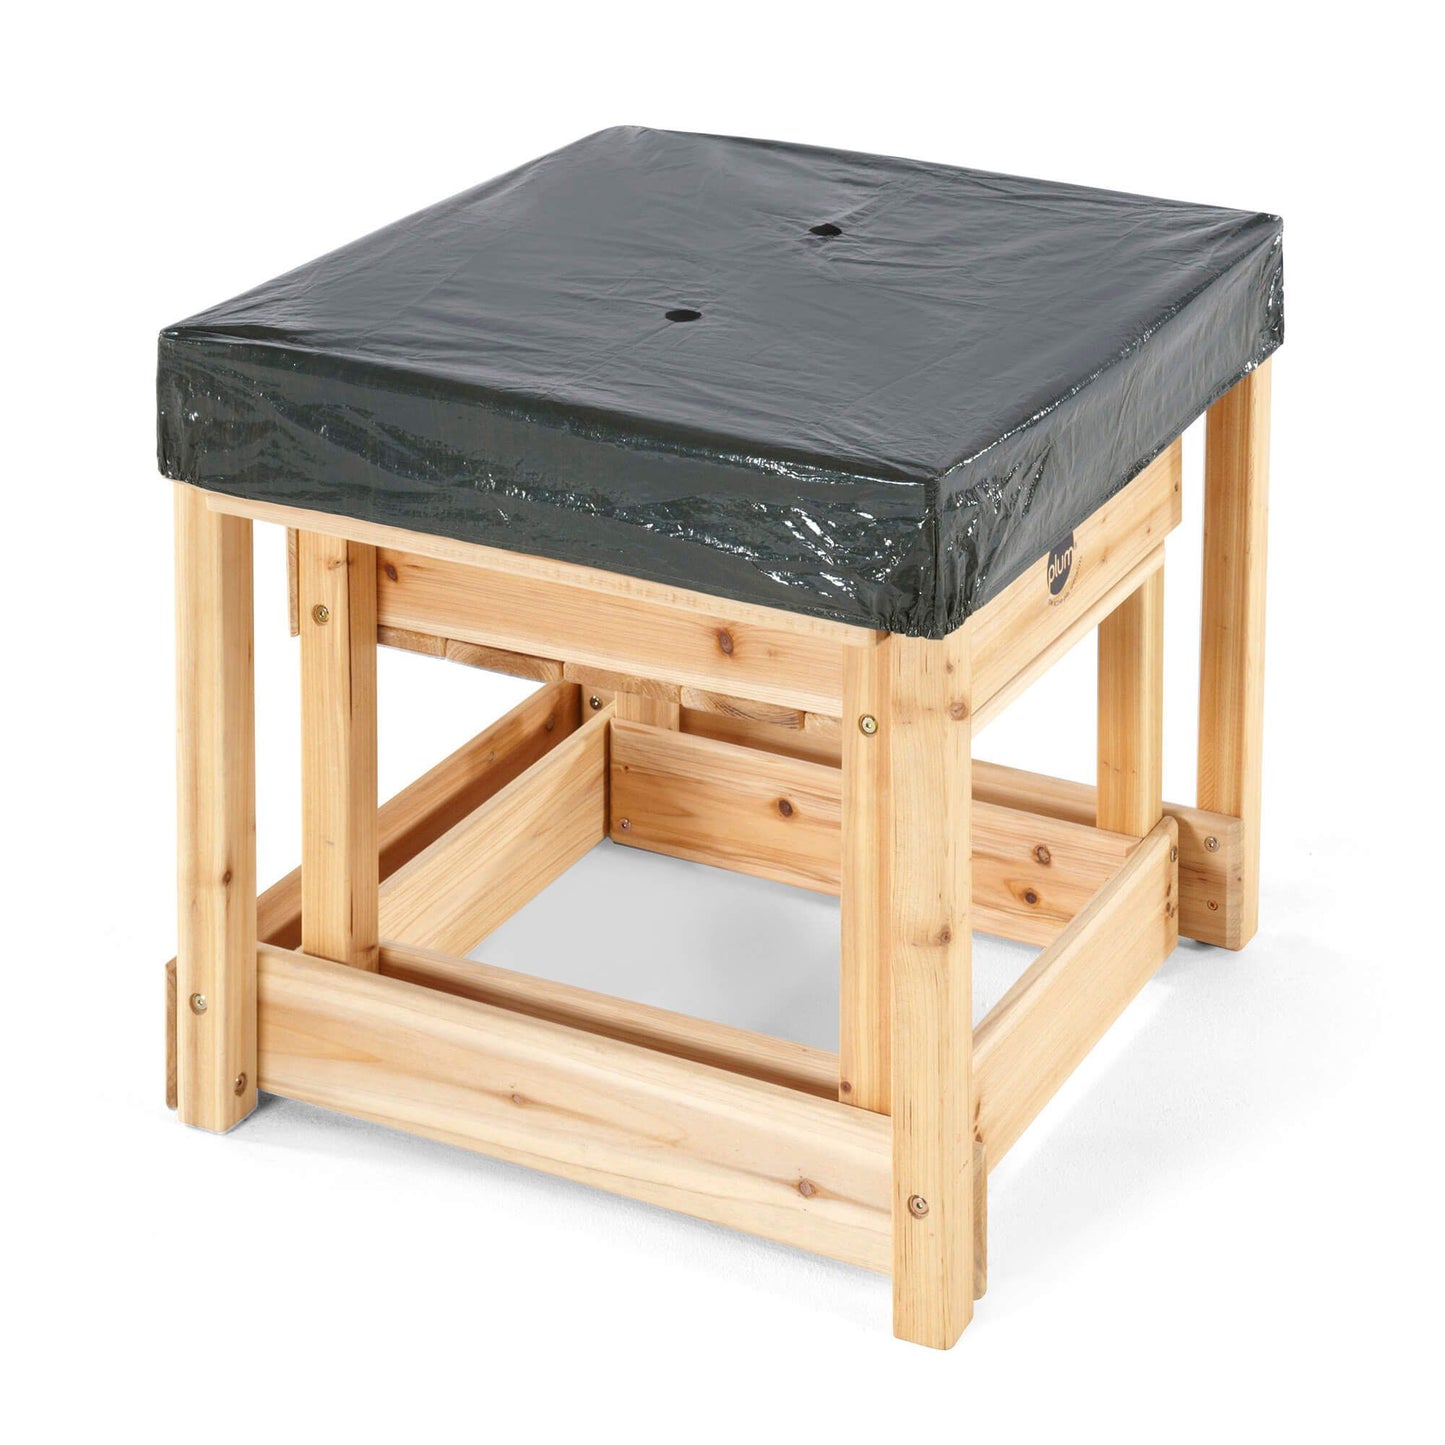 Plum® Sandy Bay Wooden Sand & Water Tables